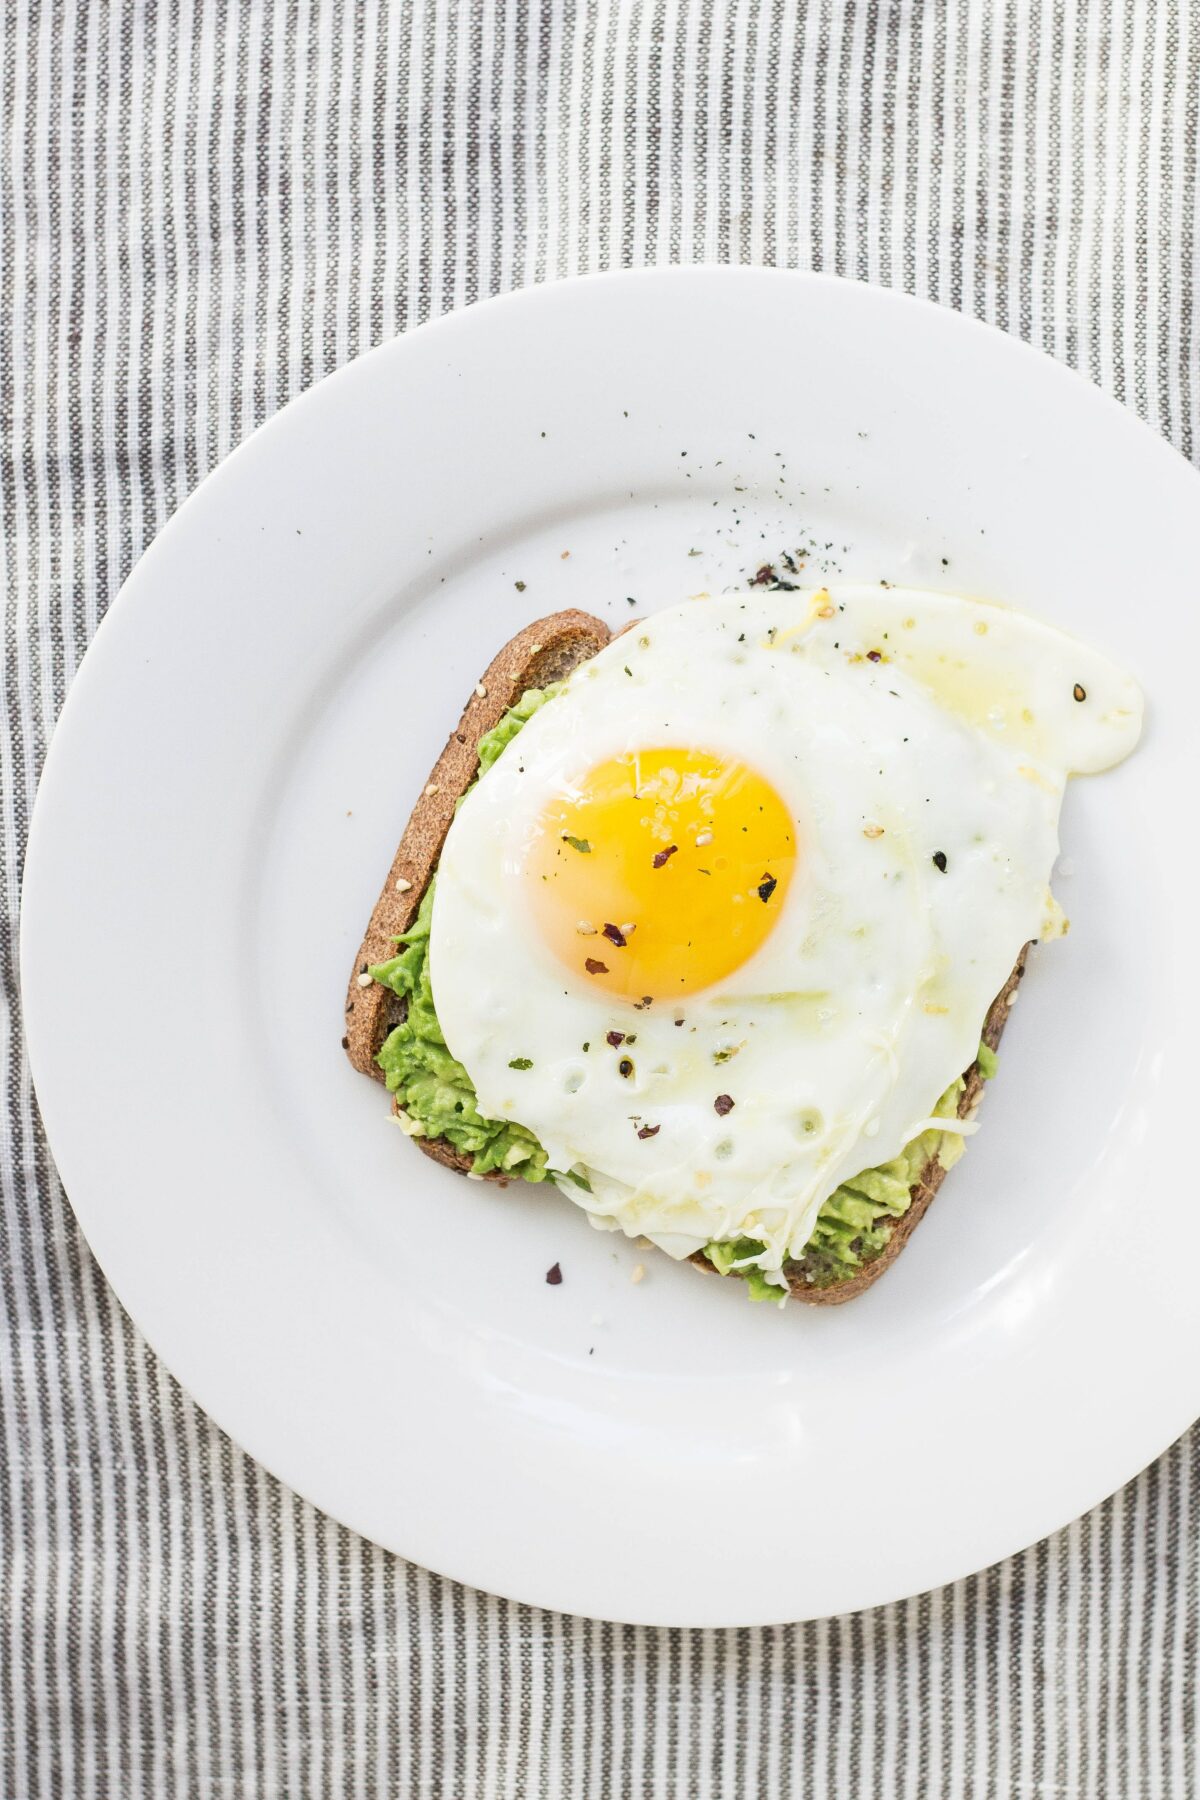 Toast with egg and avocado.